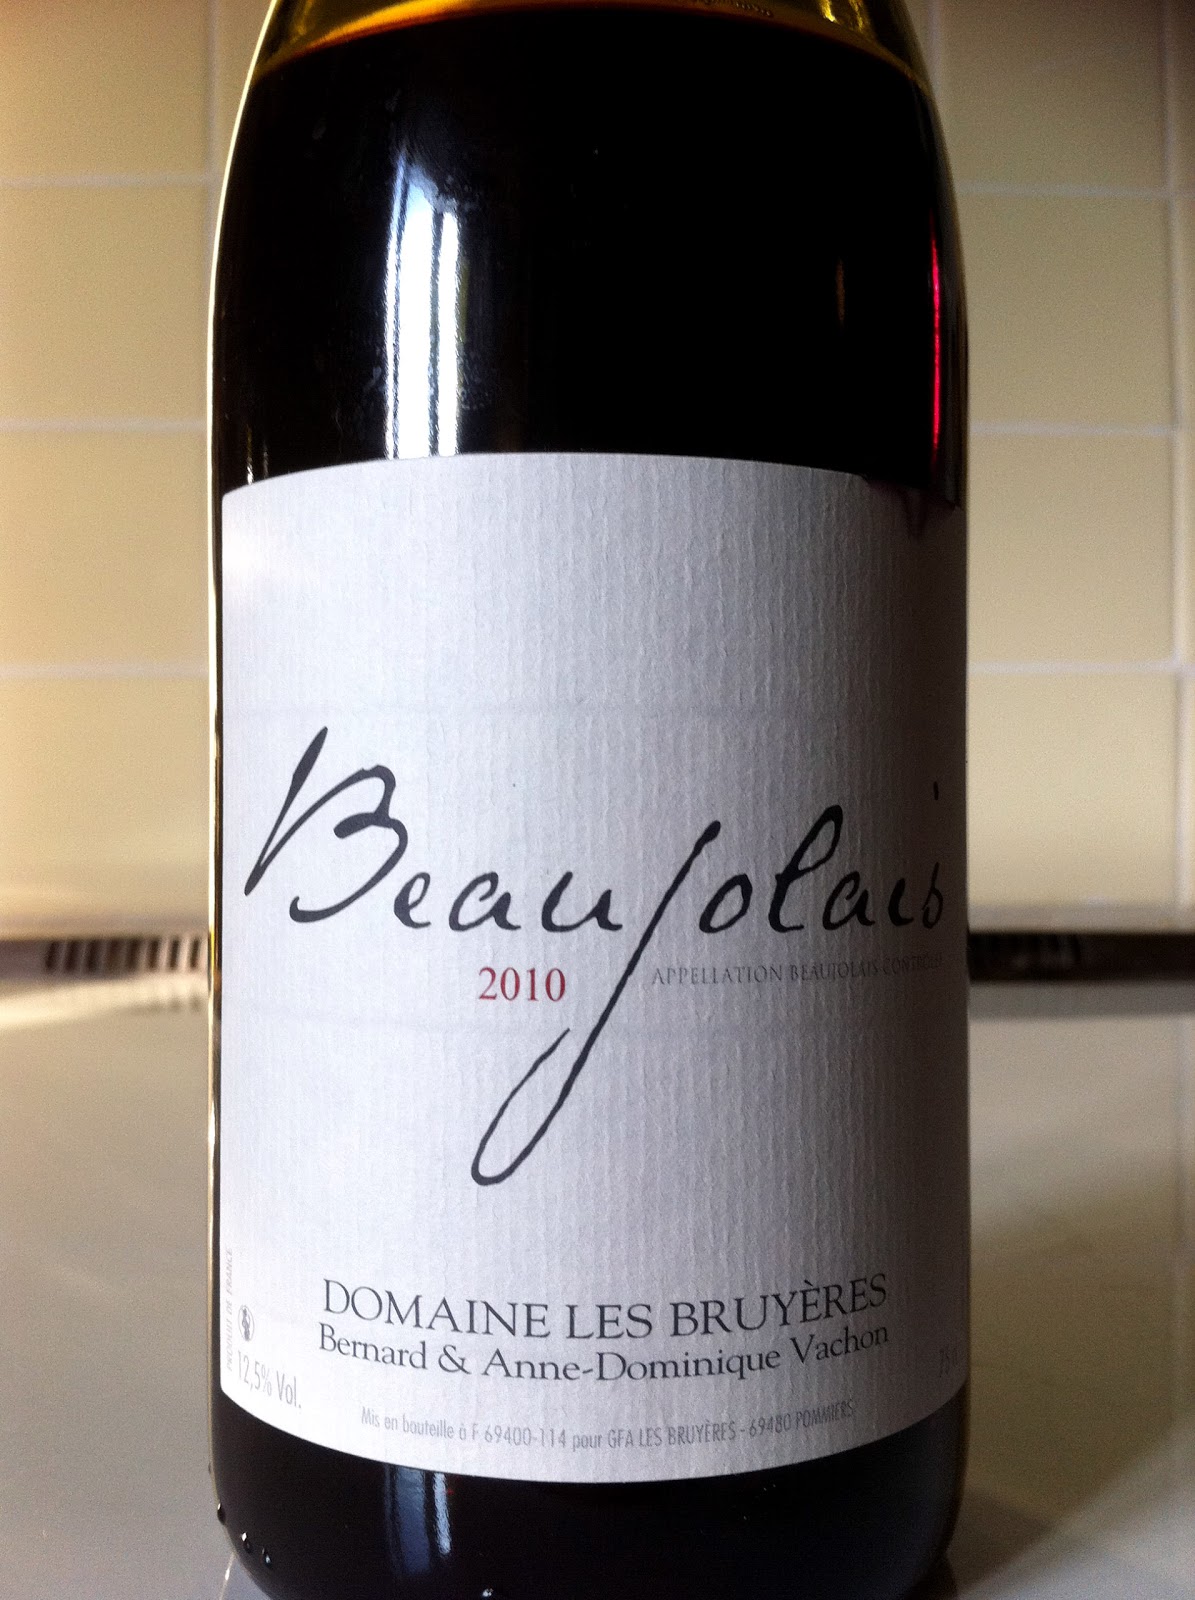 More than just wine The wine of the week is a Beaujolais